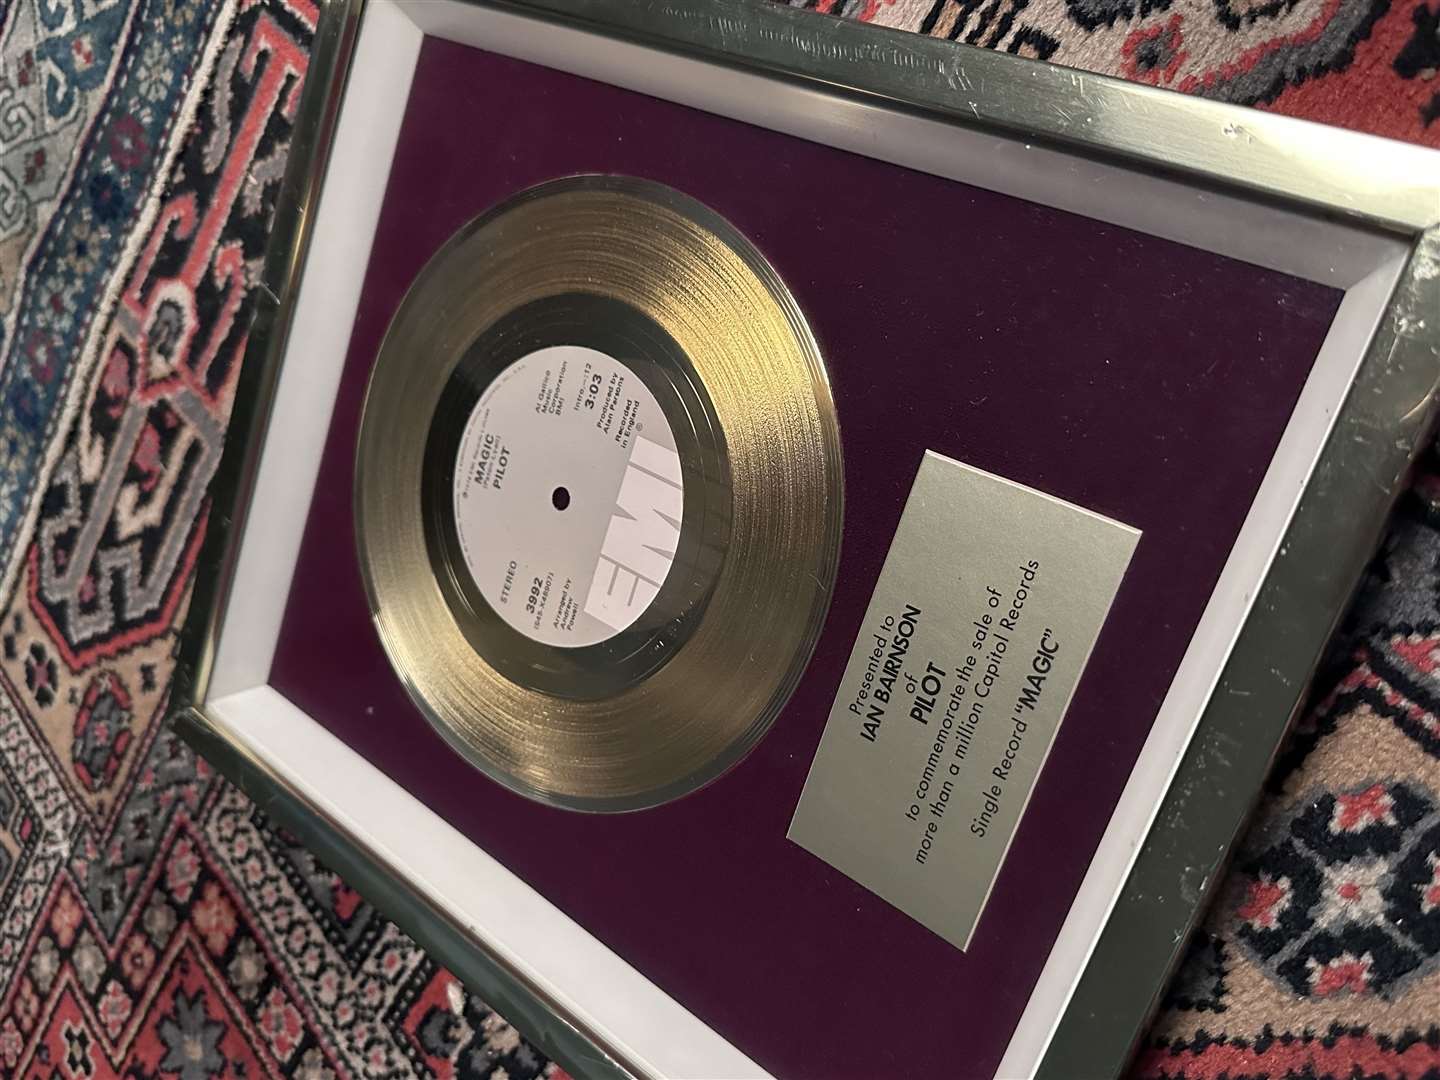 Ian Bairnson won a gold disc for playing guitar on 1970 pop band Pilot’s hit Magic, which later featured in the Adam Sandler film Happy Gilmore (Gardiner Houlgate/PA)